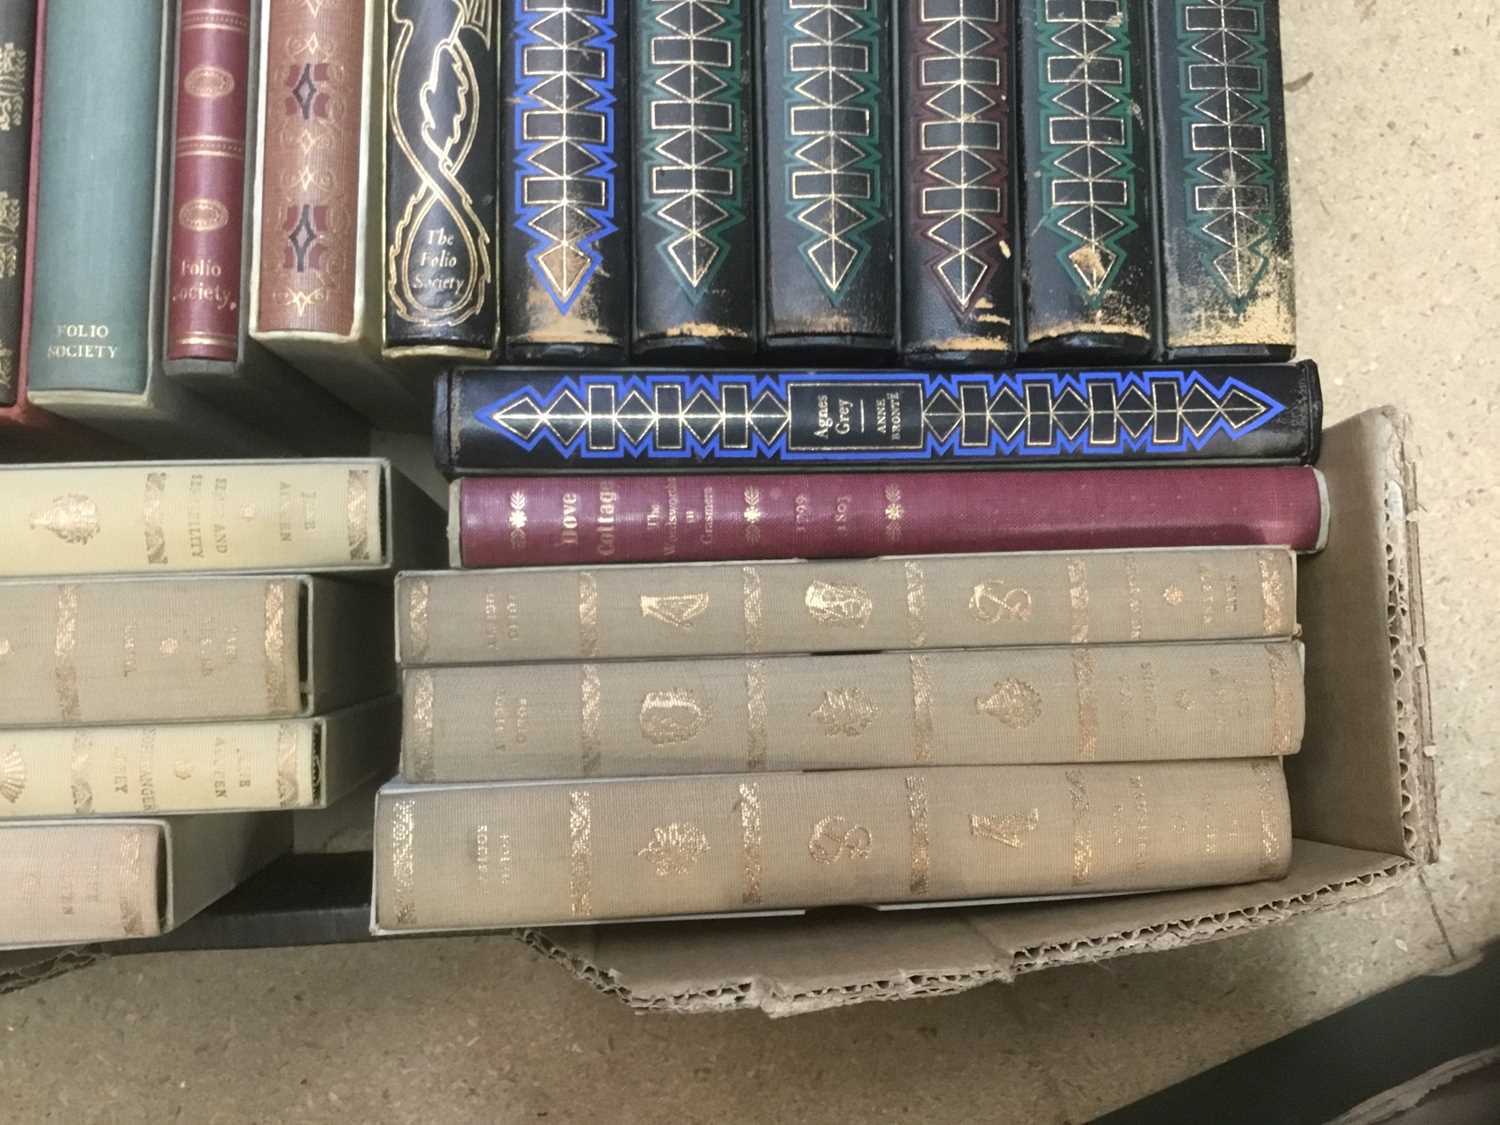 Folio society, new box of books, approximately 31 books including Works of Jane Austin and others